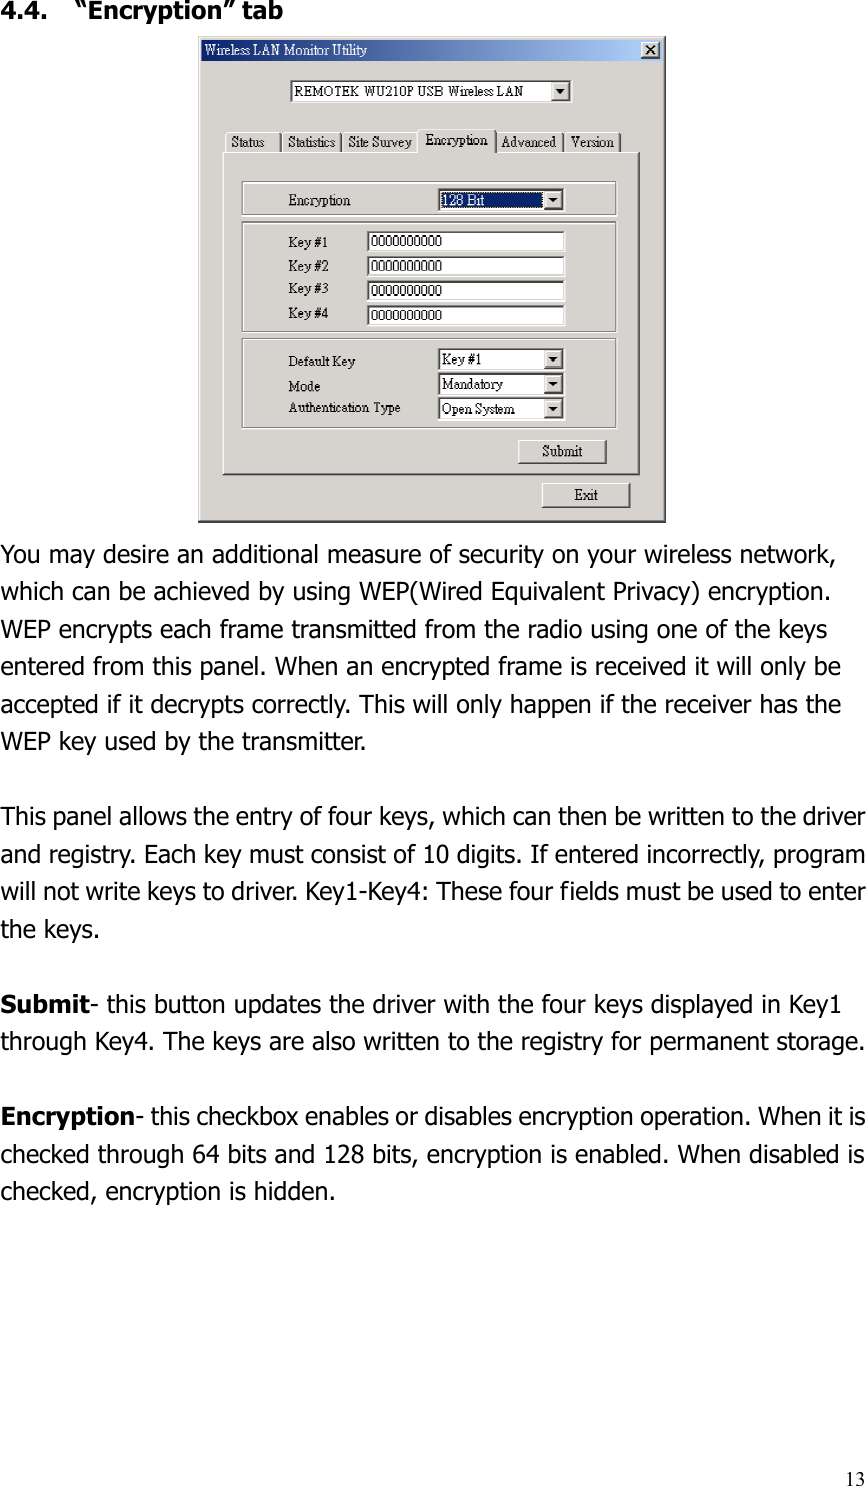  134.4. “Encryption” tab You may desire an additional measure of security on your wireless network, which can be achieved by using WEP(Wired Equivalent Privacy) encryption. WEP encrypts each frame transmitted from the radio using one of the keys entered from this panel. When an encrypted frame is received it will only be accepted if it decrypts correctly. This will only happen if the receiver has the WEP key used by the transmitter.  This panel allows the entry of four keys, which can then be written to the driver and registry. Each key must consist of 10 digits. If entered incorrectly, program will not write keys to driver. Key1-Key4: These four fields must be used to enter the keys.  Submit- this button updates the driver with the four keys displayed in Key1 through Key4. The keys are also written to the registry for permanent storage.  Encryption- this checkbox enables or disables encryption operation. When it is checked through 64 bits and 128 bits, encryption is enabled. When disabled is checked, encryption is hidden. 